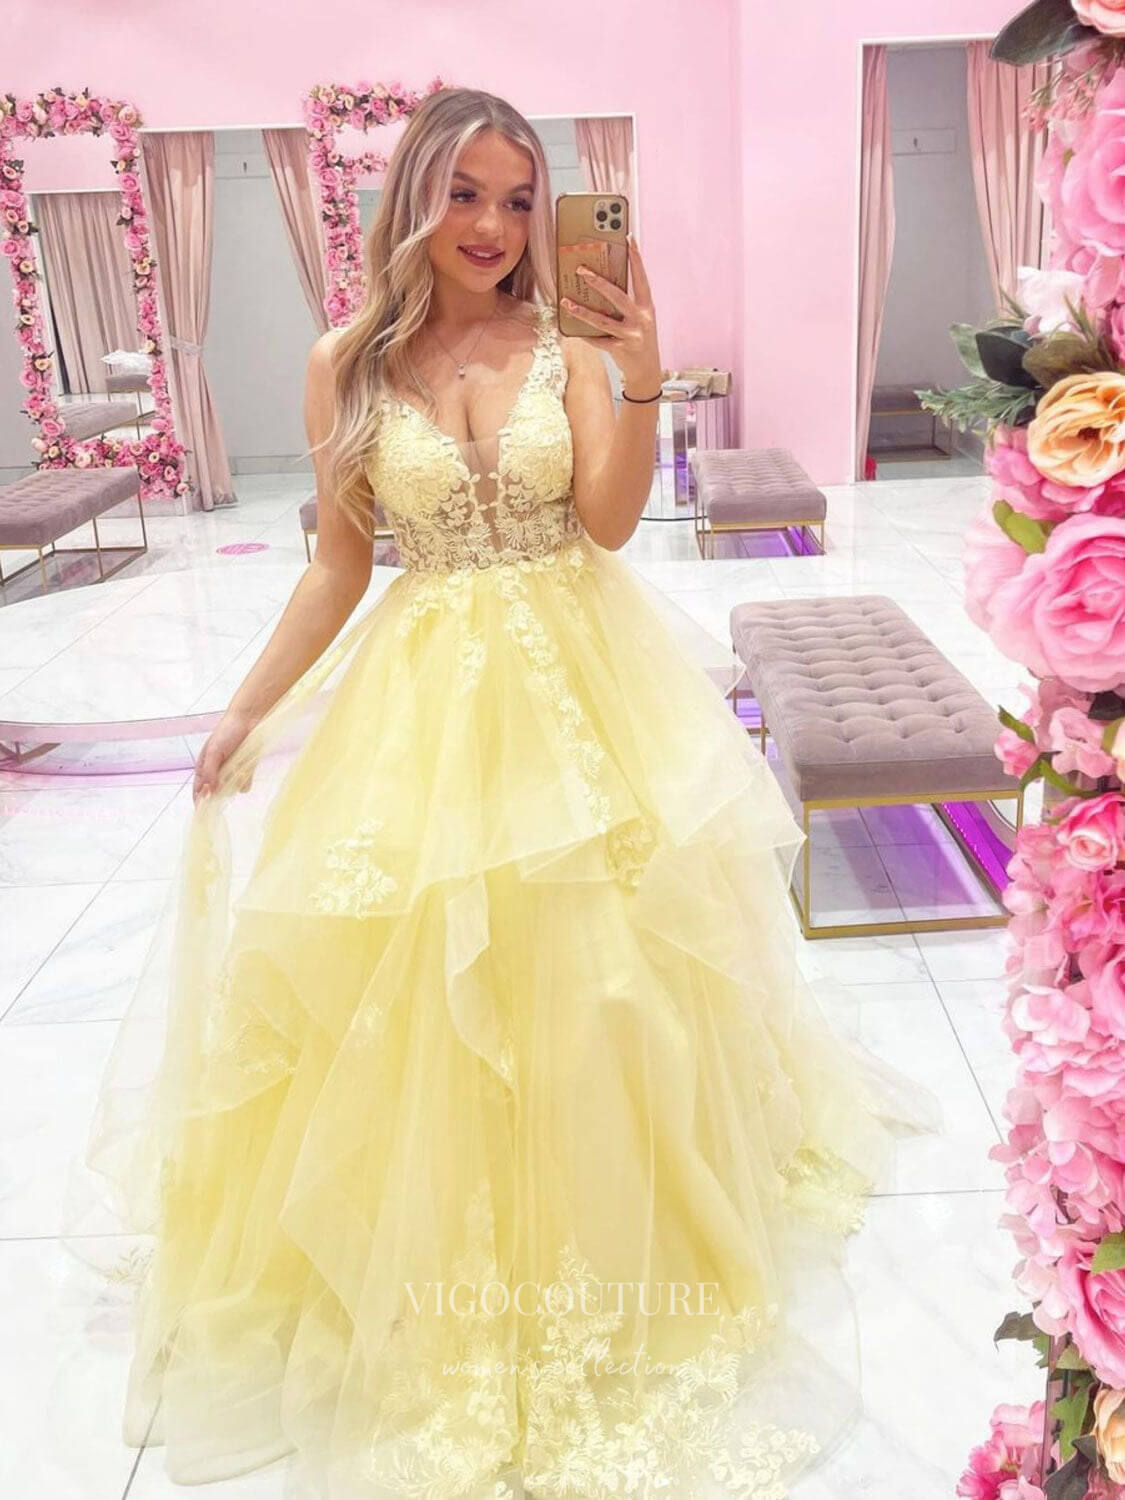 vigocouture-Yellow Lace Applique Prom Dresses Plunging V-Neck Ruffle Tiered Evening Dress 21770-Prom Dresses-vigocouture-Yellow-US2-